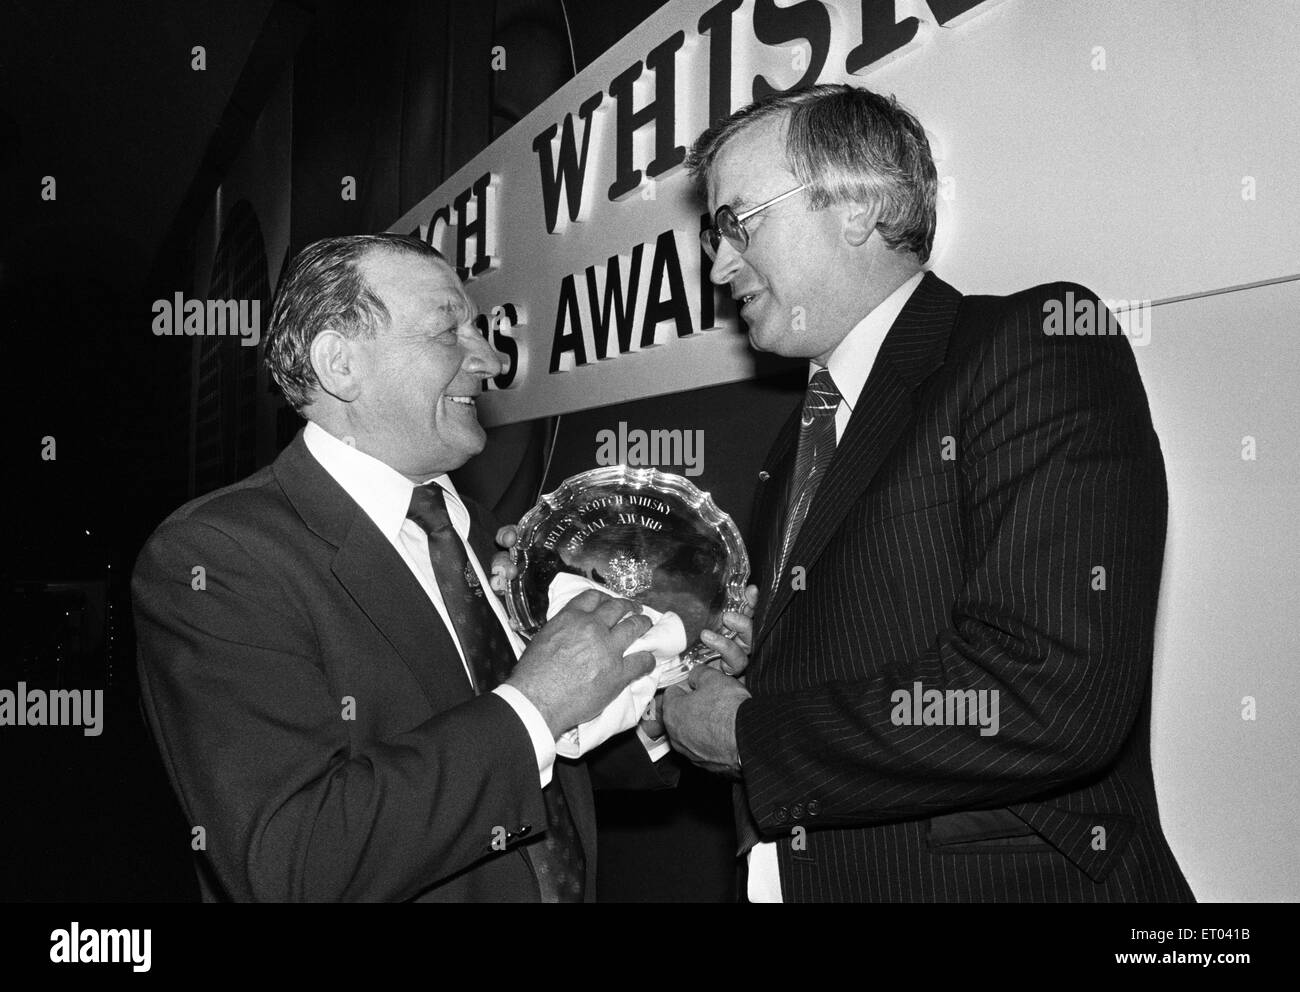 Bells Scotch Whisky Football Managers Awards. Leicester City manager Jock Wallace who won the Special Award for taking his side back in to the First Division is presented the award by Liverpool manager Bob Paisley who won the Manager of the Year Award for the fourth time in five years. 24th May 1980. Stock Photo